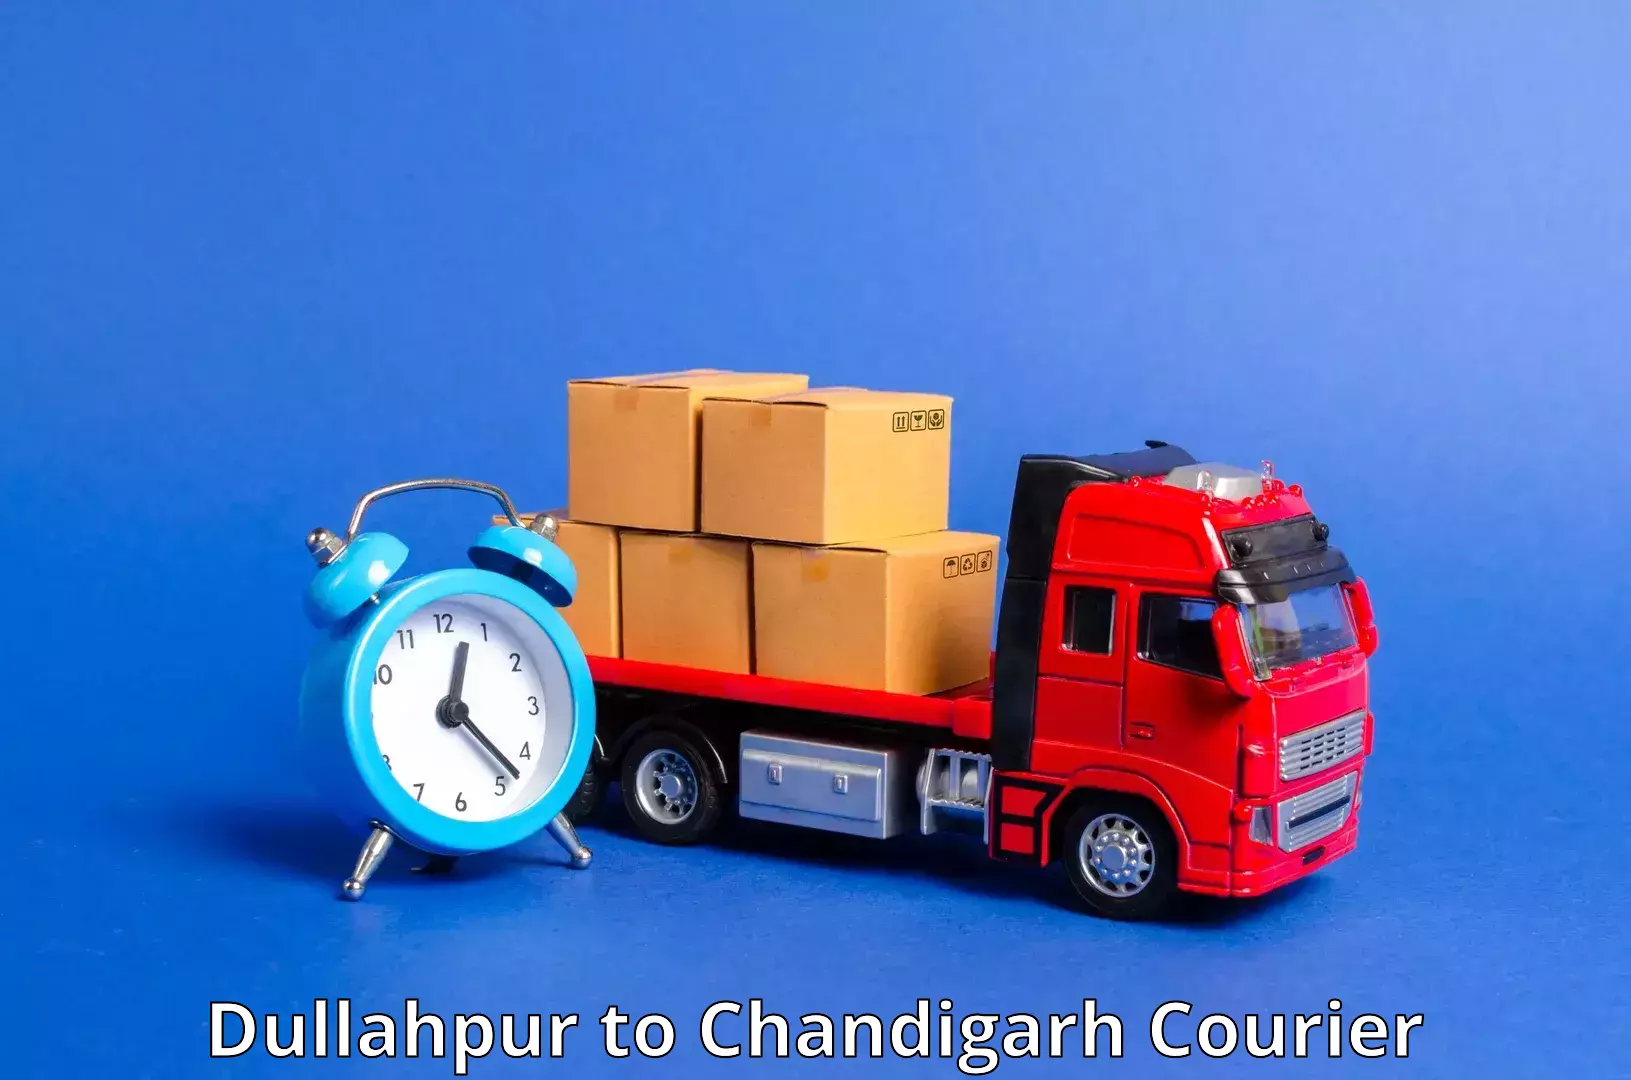 State-of-the-art courier technology Dullahpur to Chandigarh